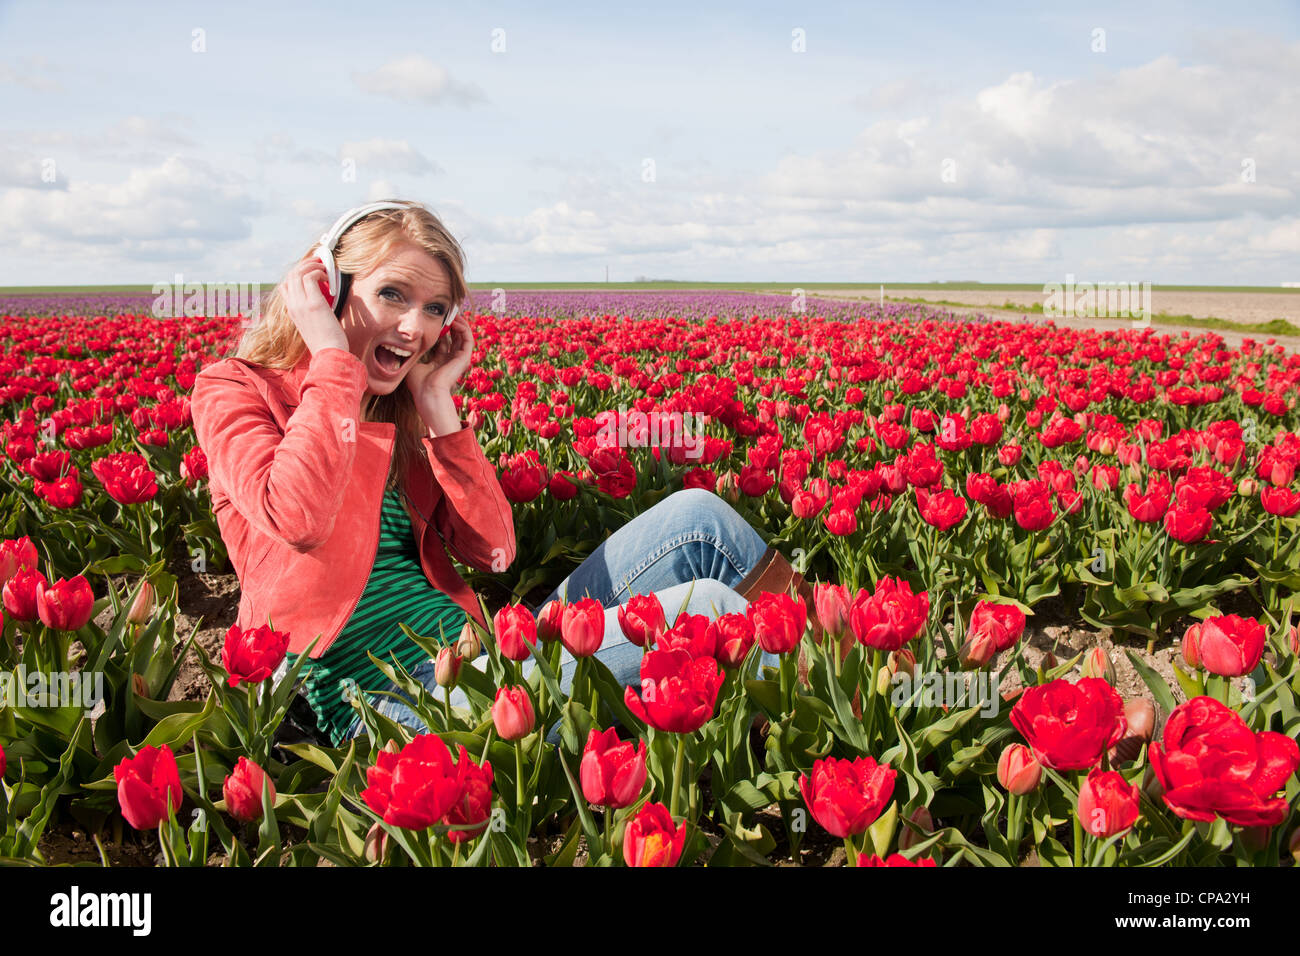 Dutch girl with long blond hair is listening to music Stock Photo - Alamy